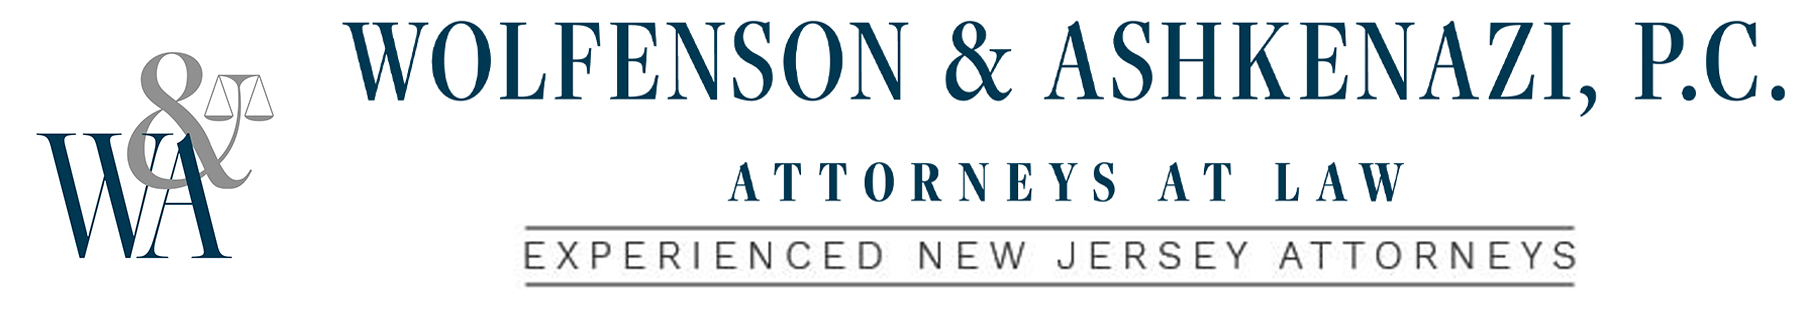 Wolfenson & Ashkenazi, P.C. | Attorneys At Law | Experienced New Jersey Attorneys